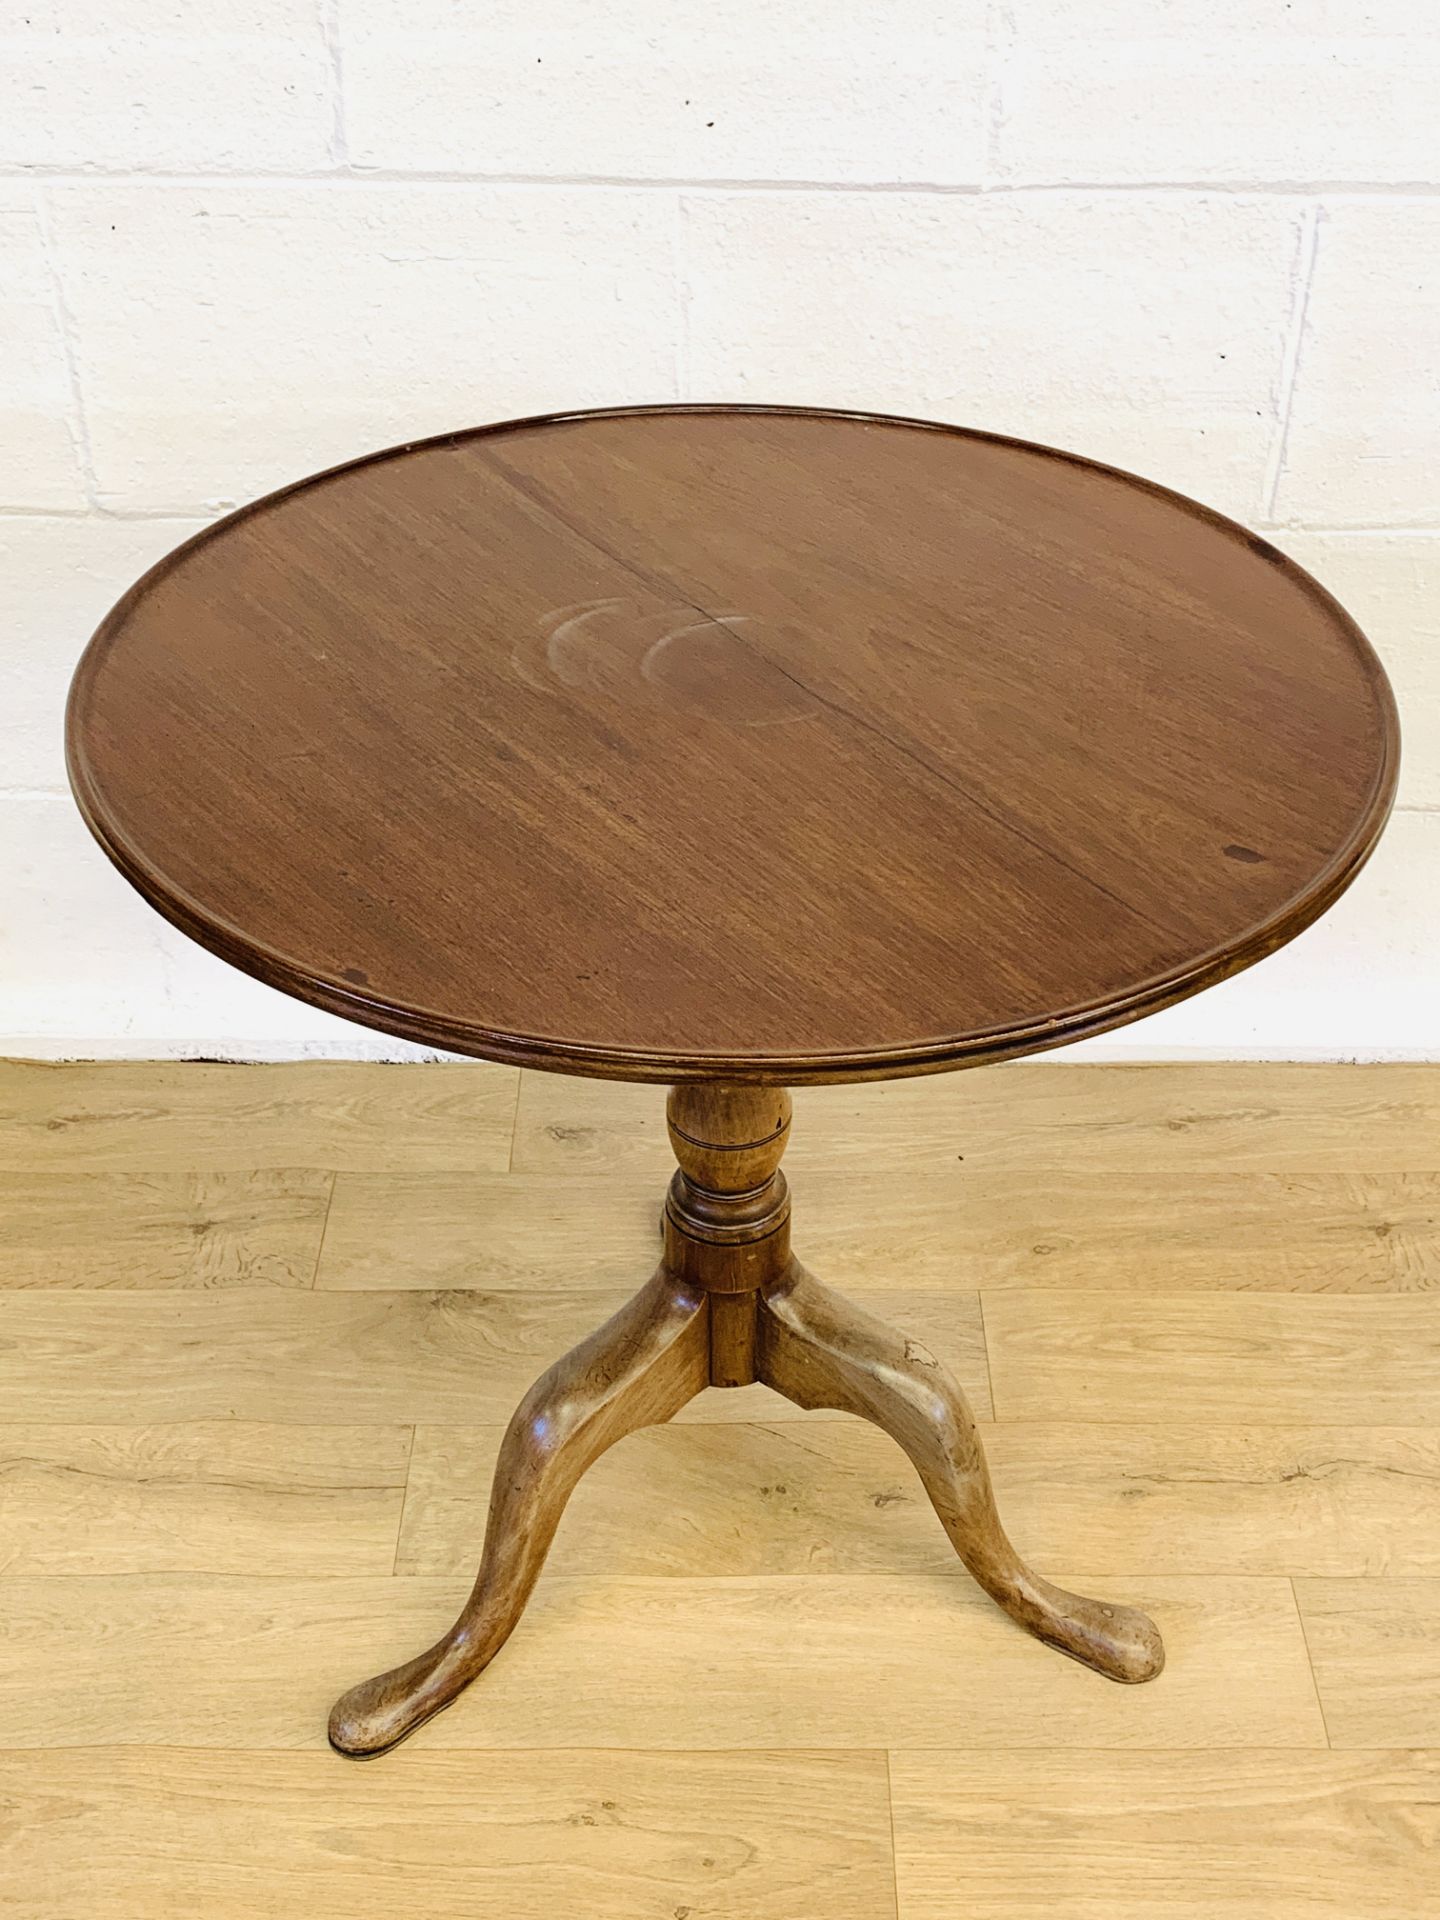 Mahogany tilt top occasional table - Image 2 of 5